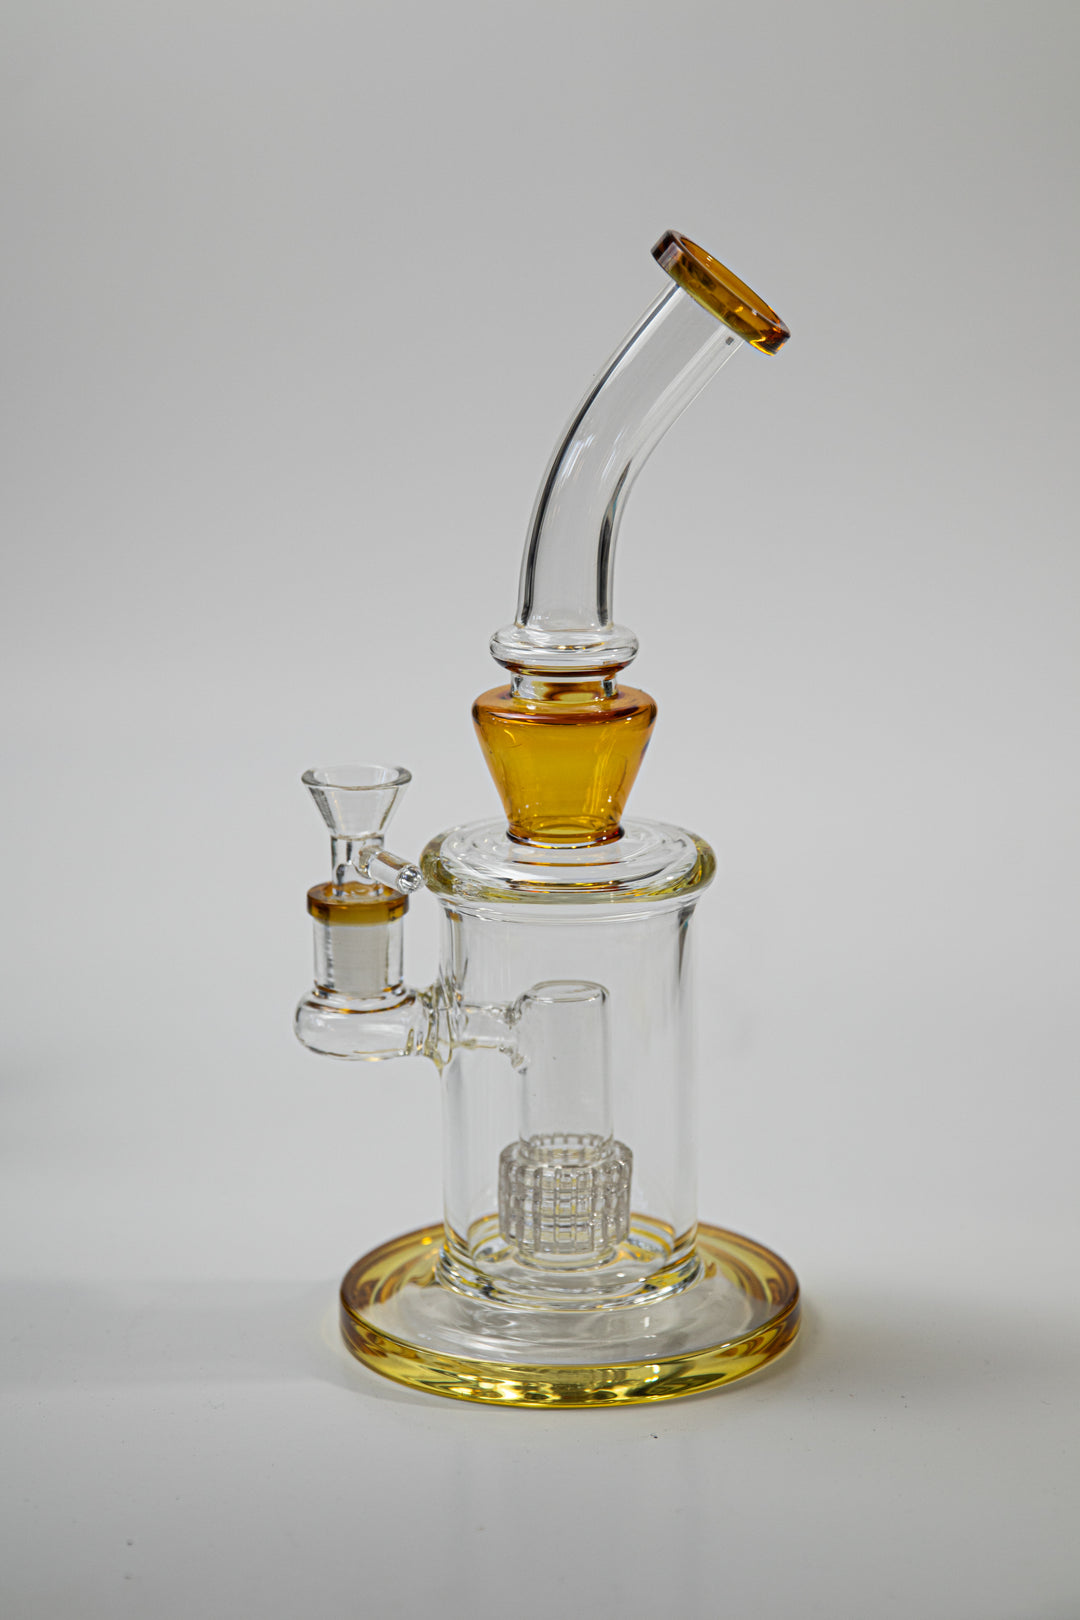 10 inch Matrix Water Pipe – a cutting-edge weed and dab companion in water bong style glass. Now available for sale, this unique piece features a 14MM male bowl, a bent down stem, and a bubbler perc. The integrated percolator ensures a smooth smoking experience, preventing water splashback, cooling the smoke down, and providing extra filtration. Colors orange 